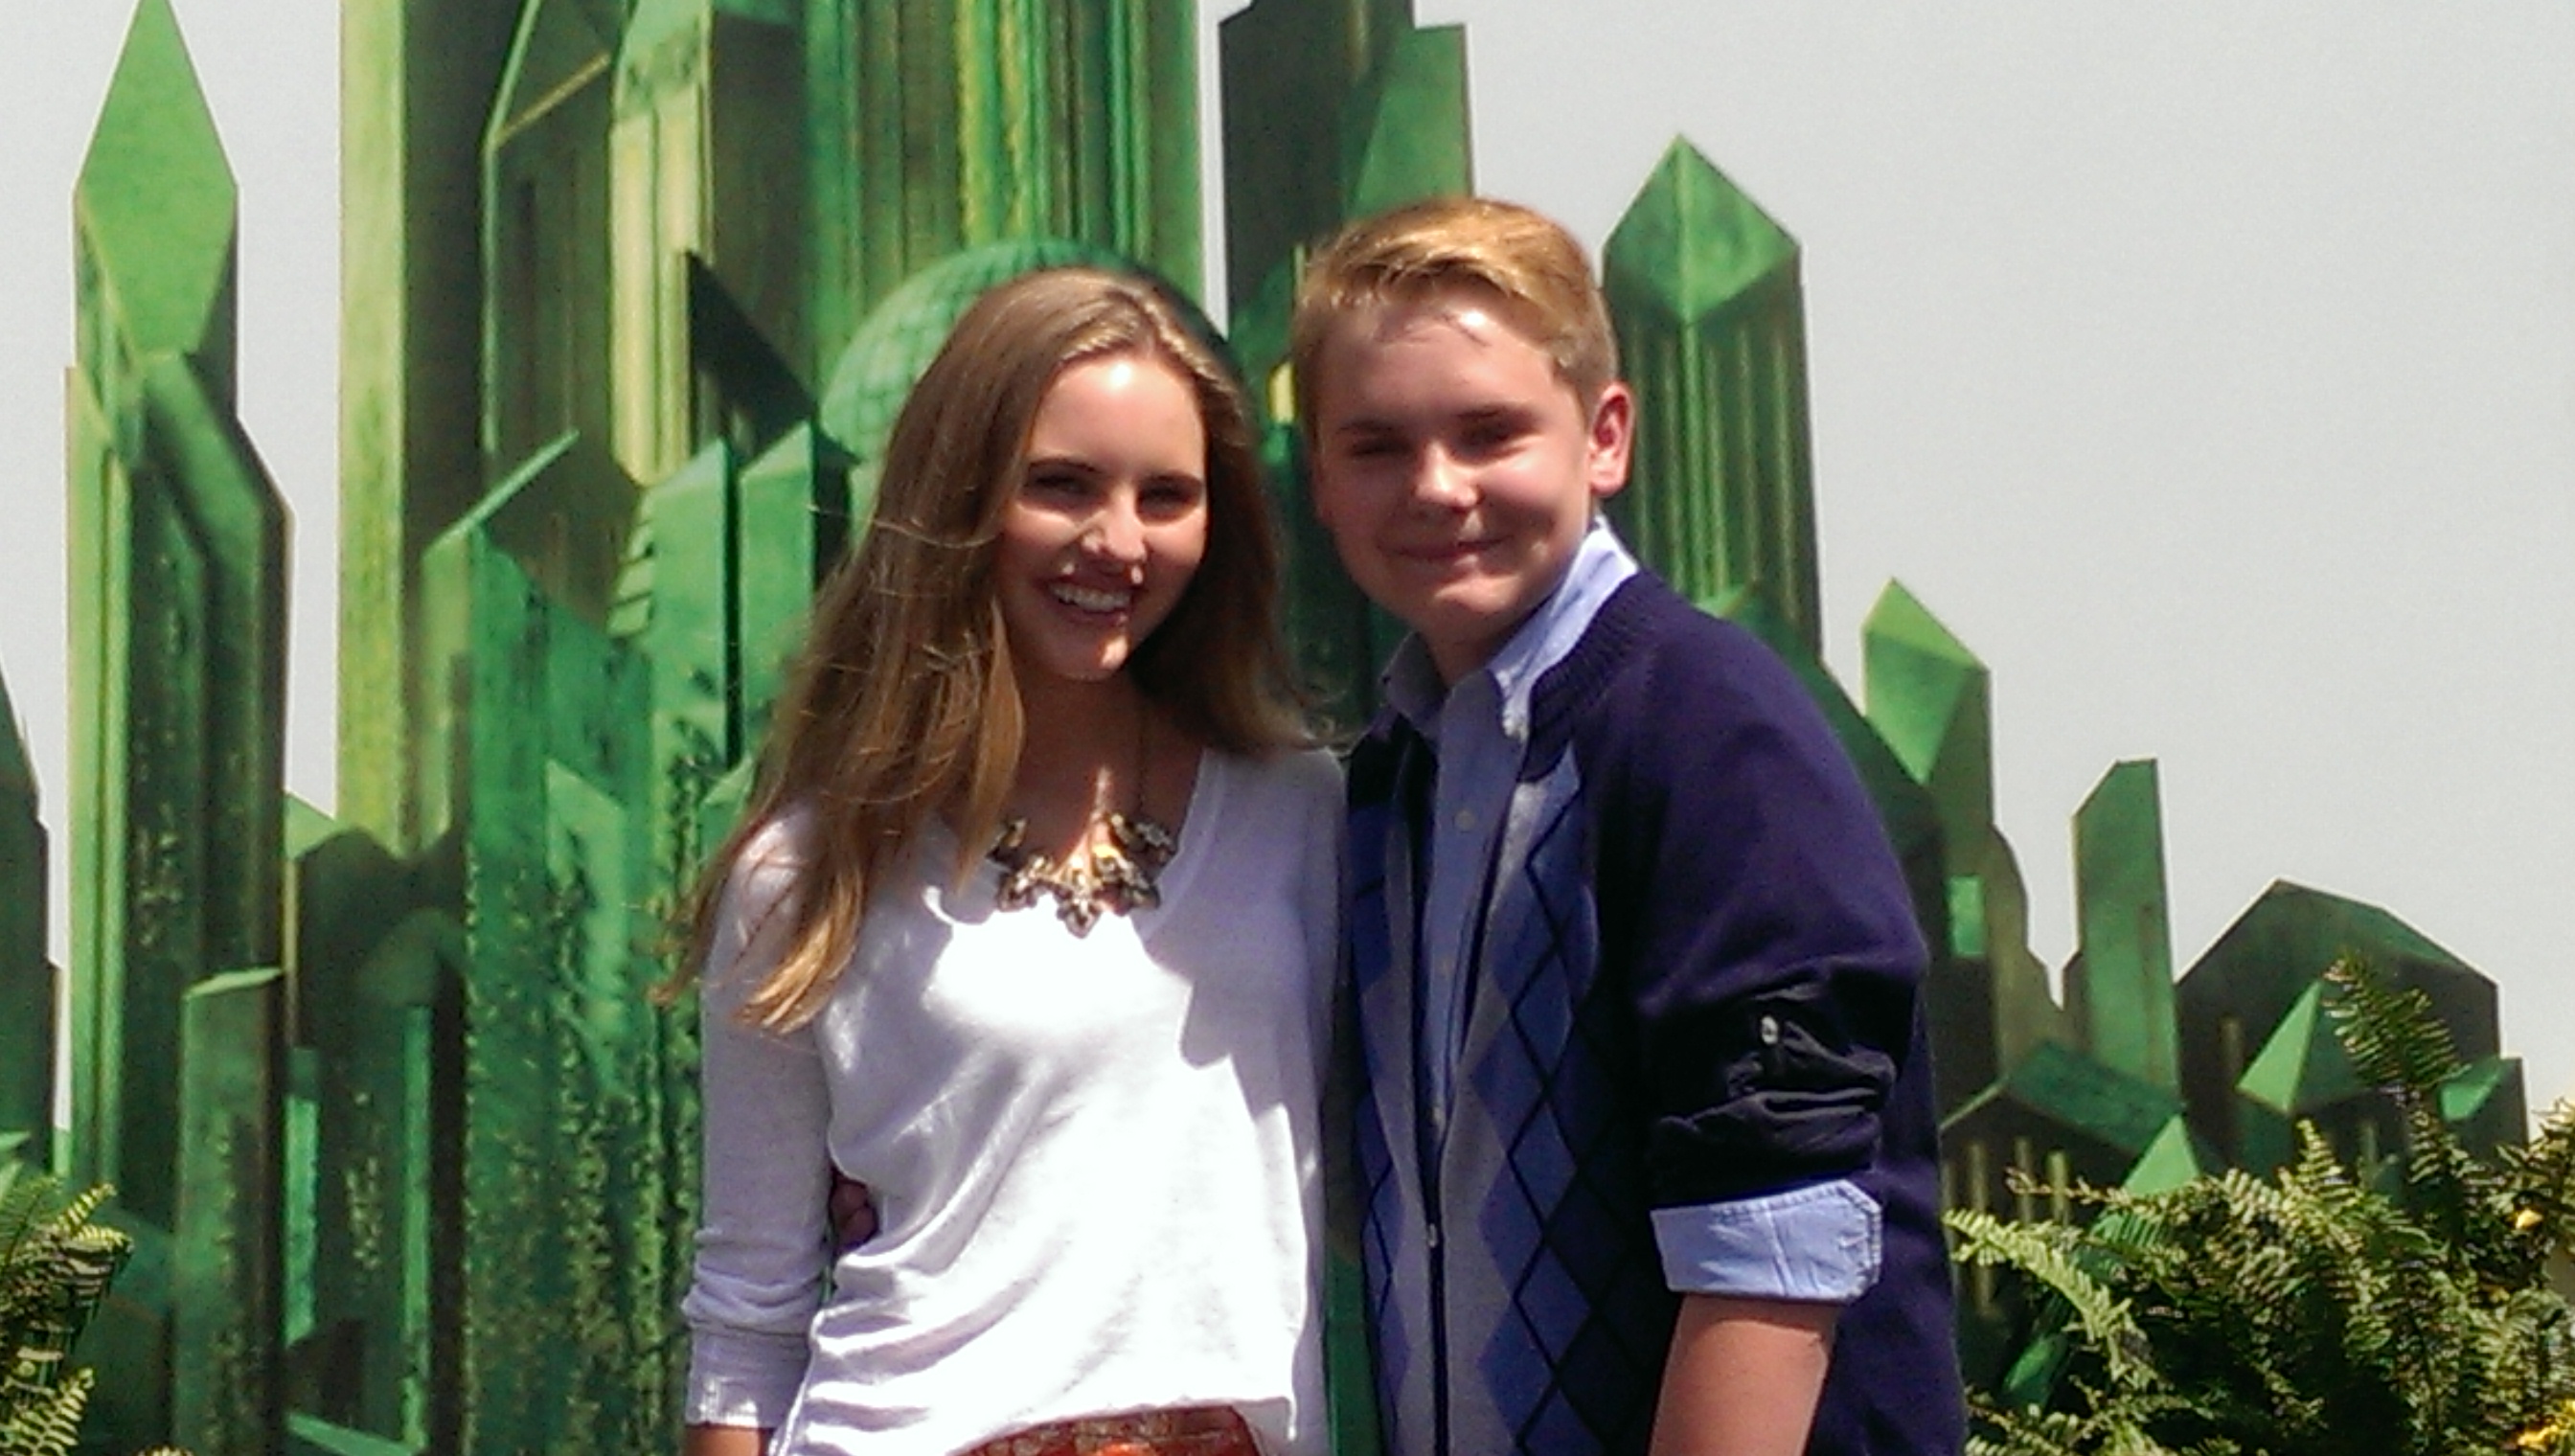 Reese Hartwig and Ella Wahlestedt at the premiere of Legends of OZ promoting Earth to Echo coming out July 2nd.